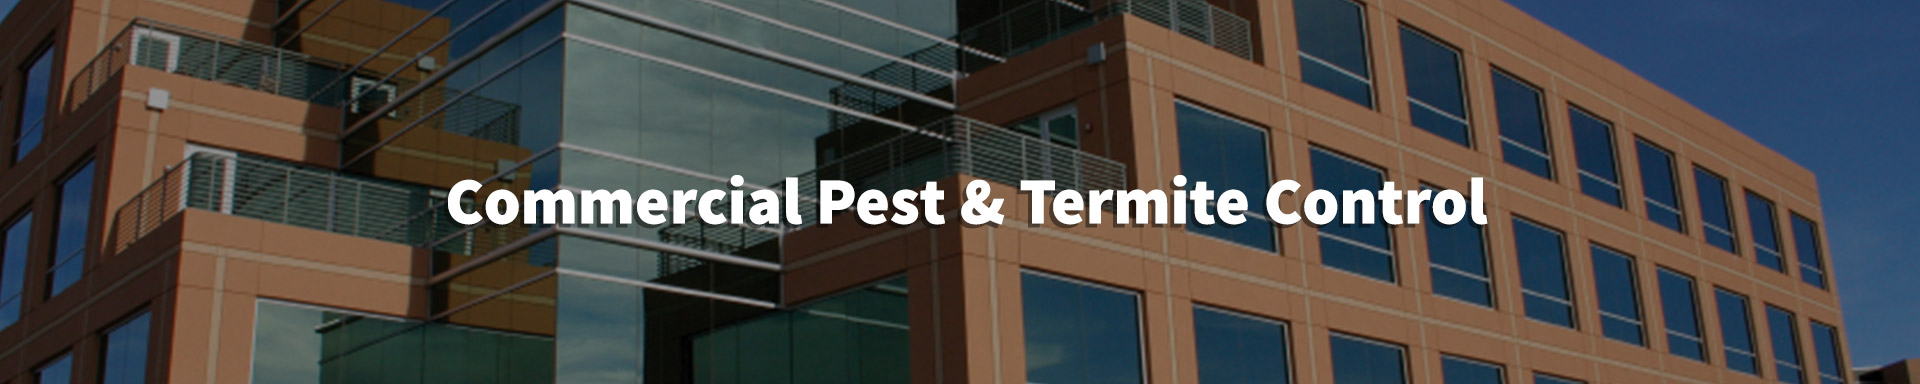 commercial pest and termite control header